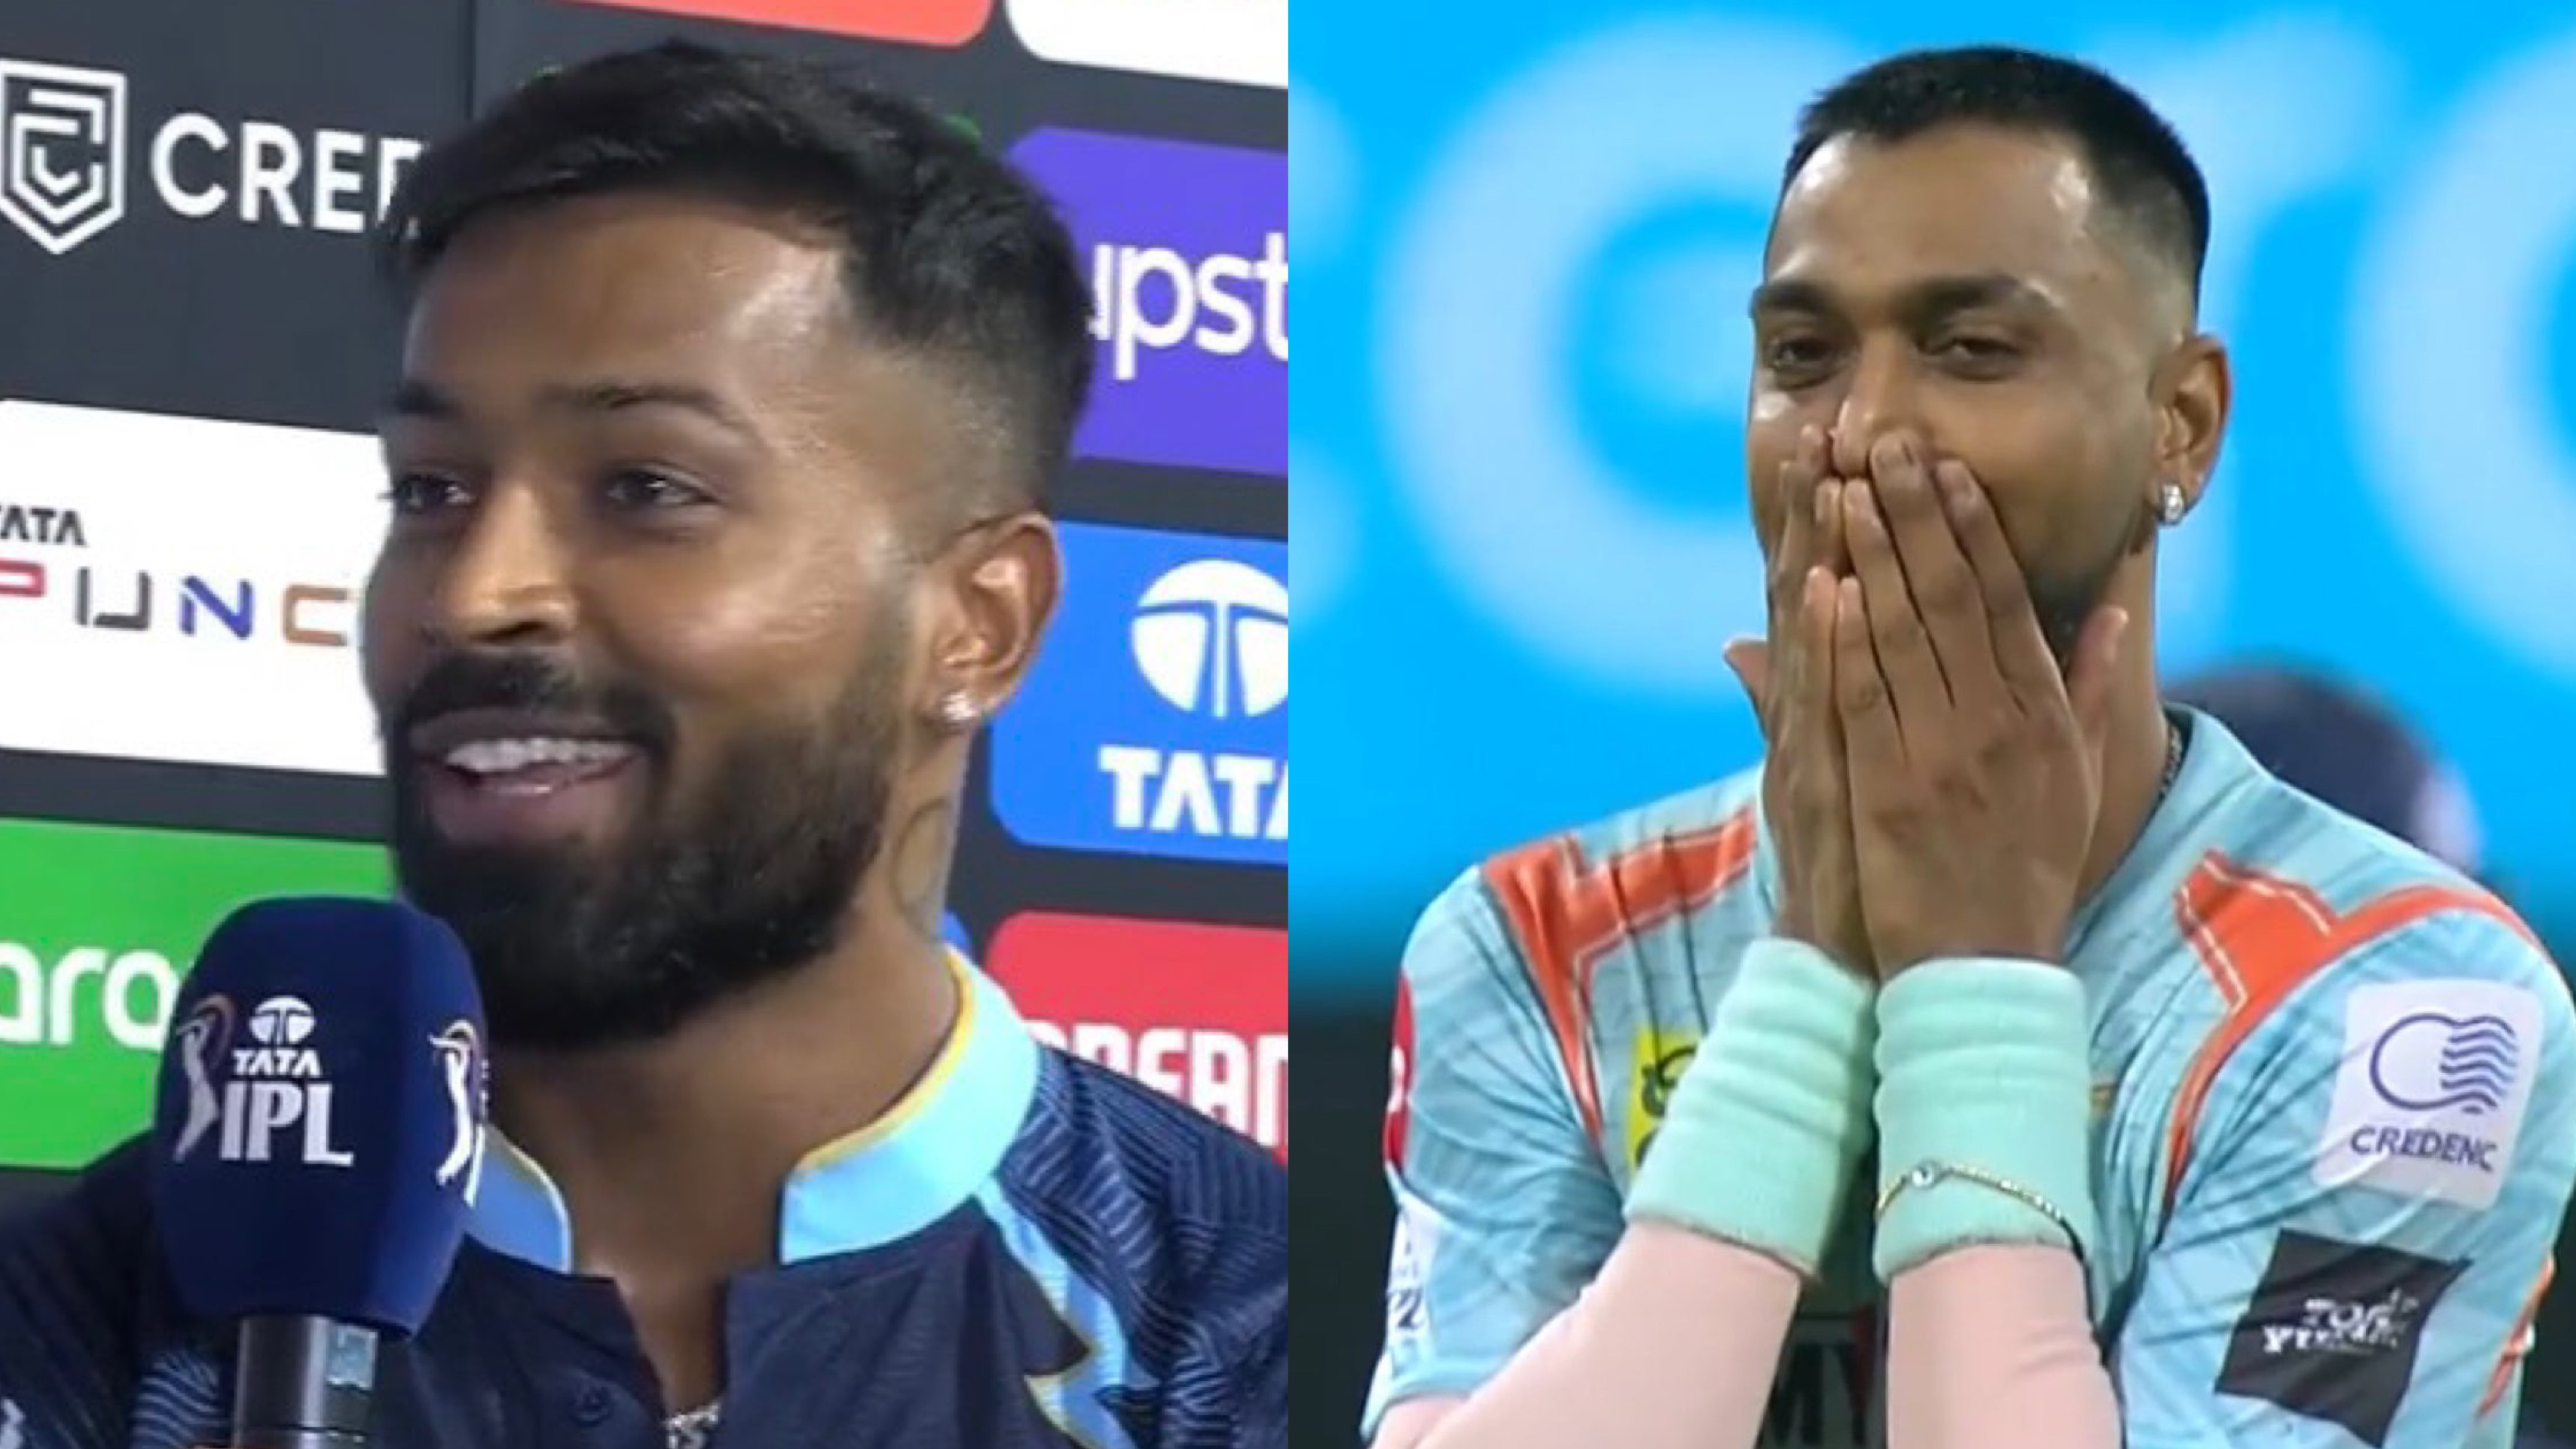 IPL 2022: WATCH - “He got me out and we won the match” Hardik reacts to getting dismissed by brother Krunal